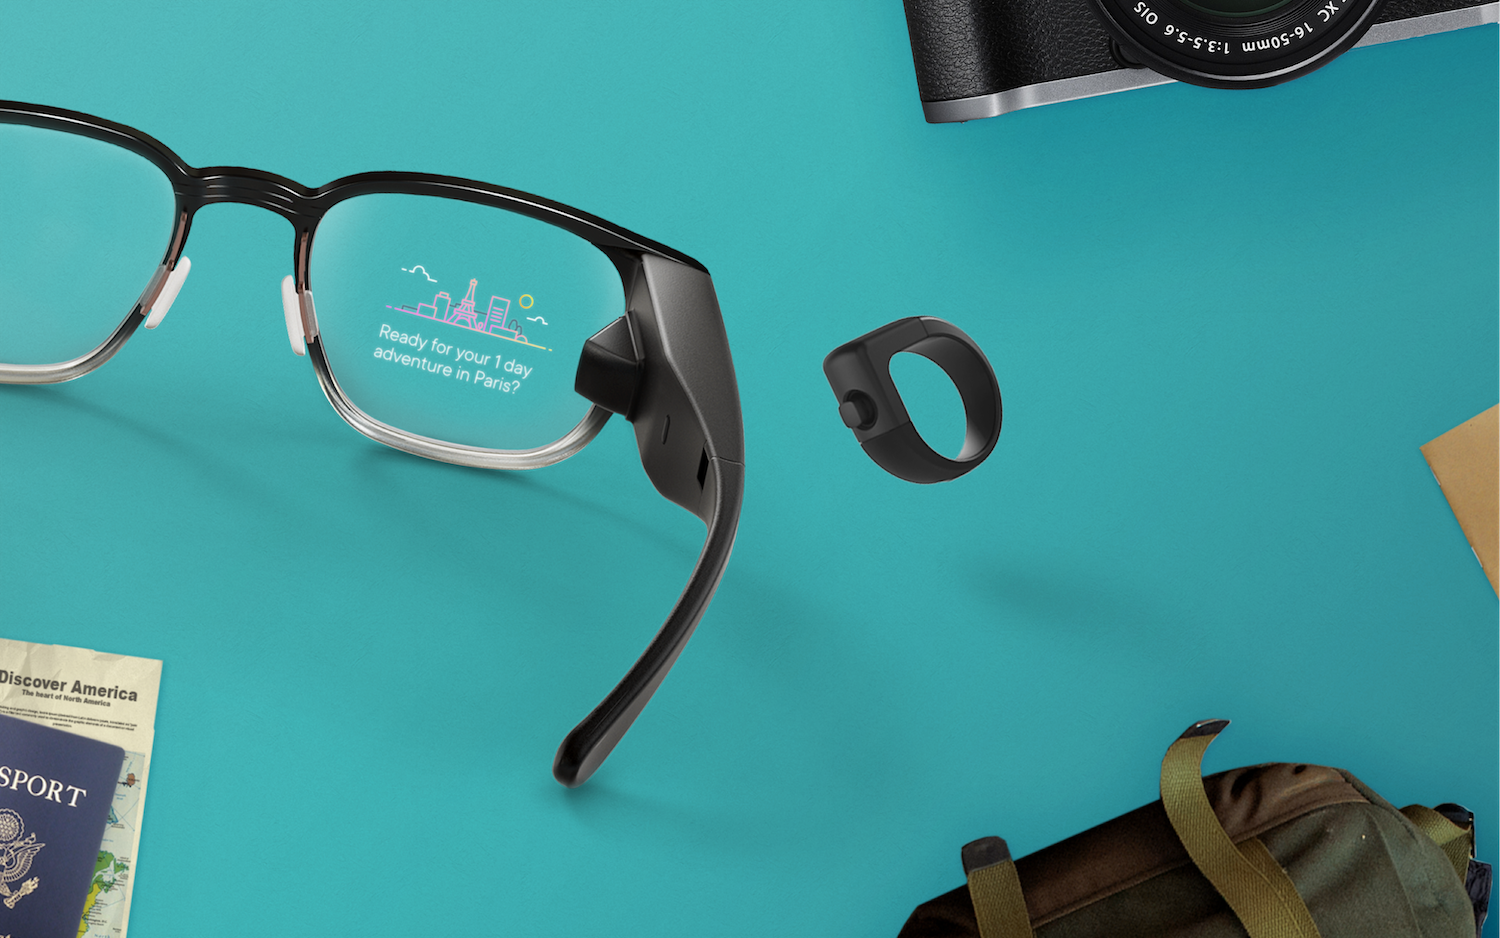 Smart glasses's way-finding features are well suited to uses cases in tourism.